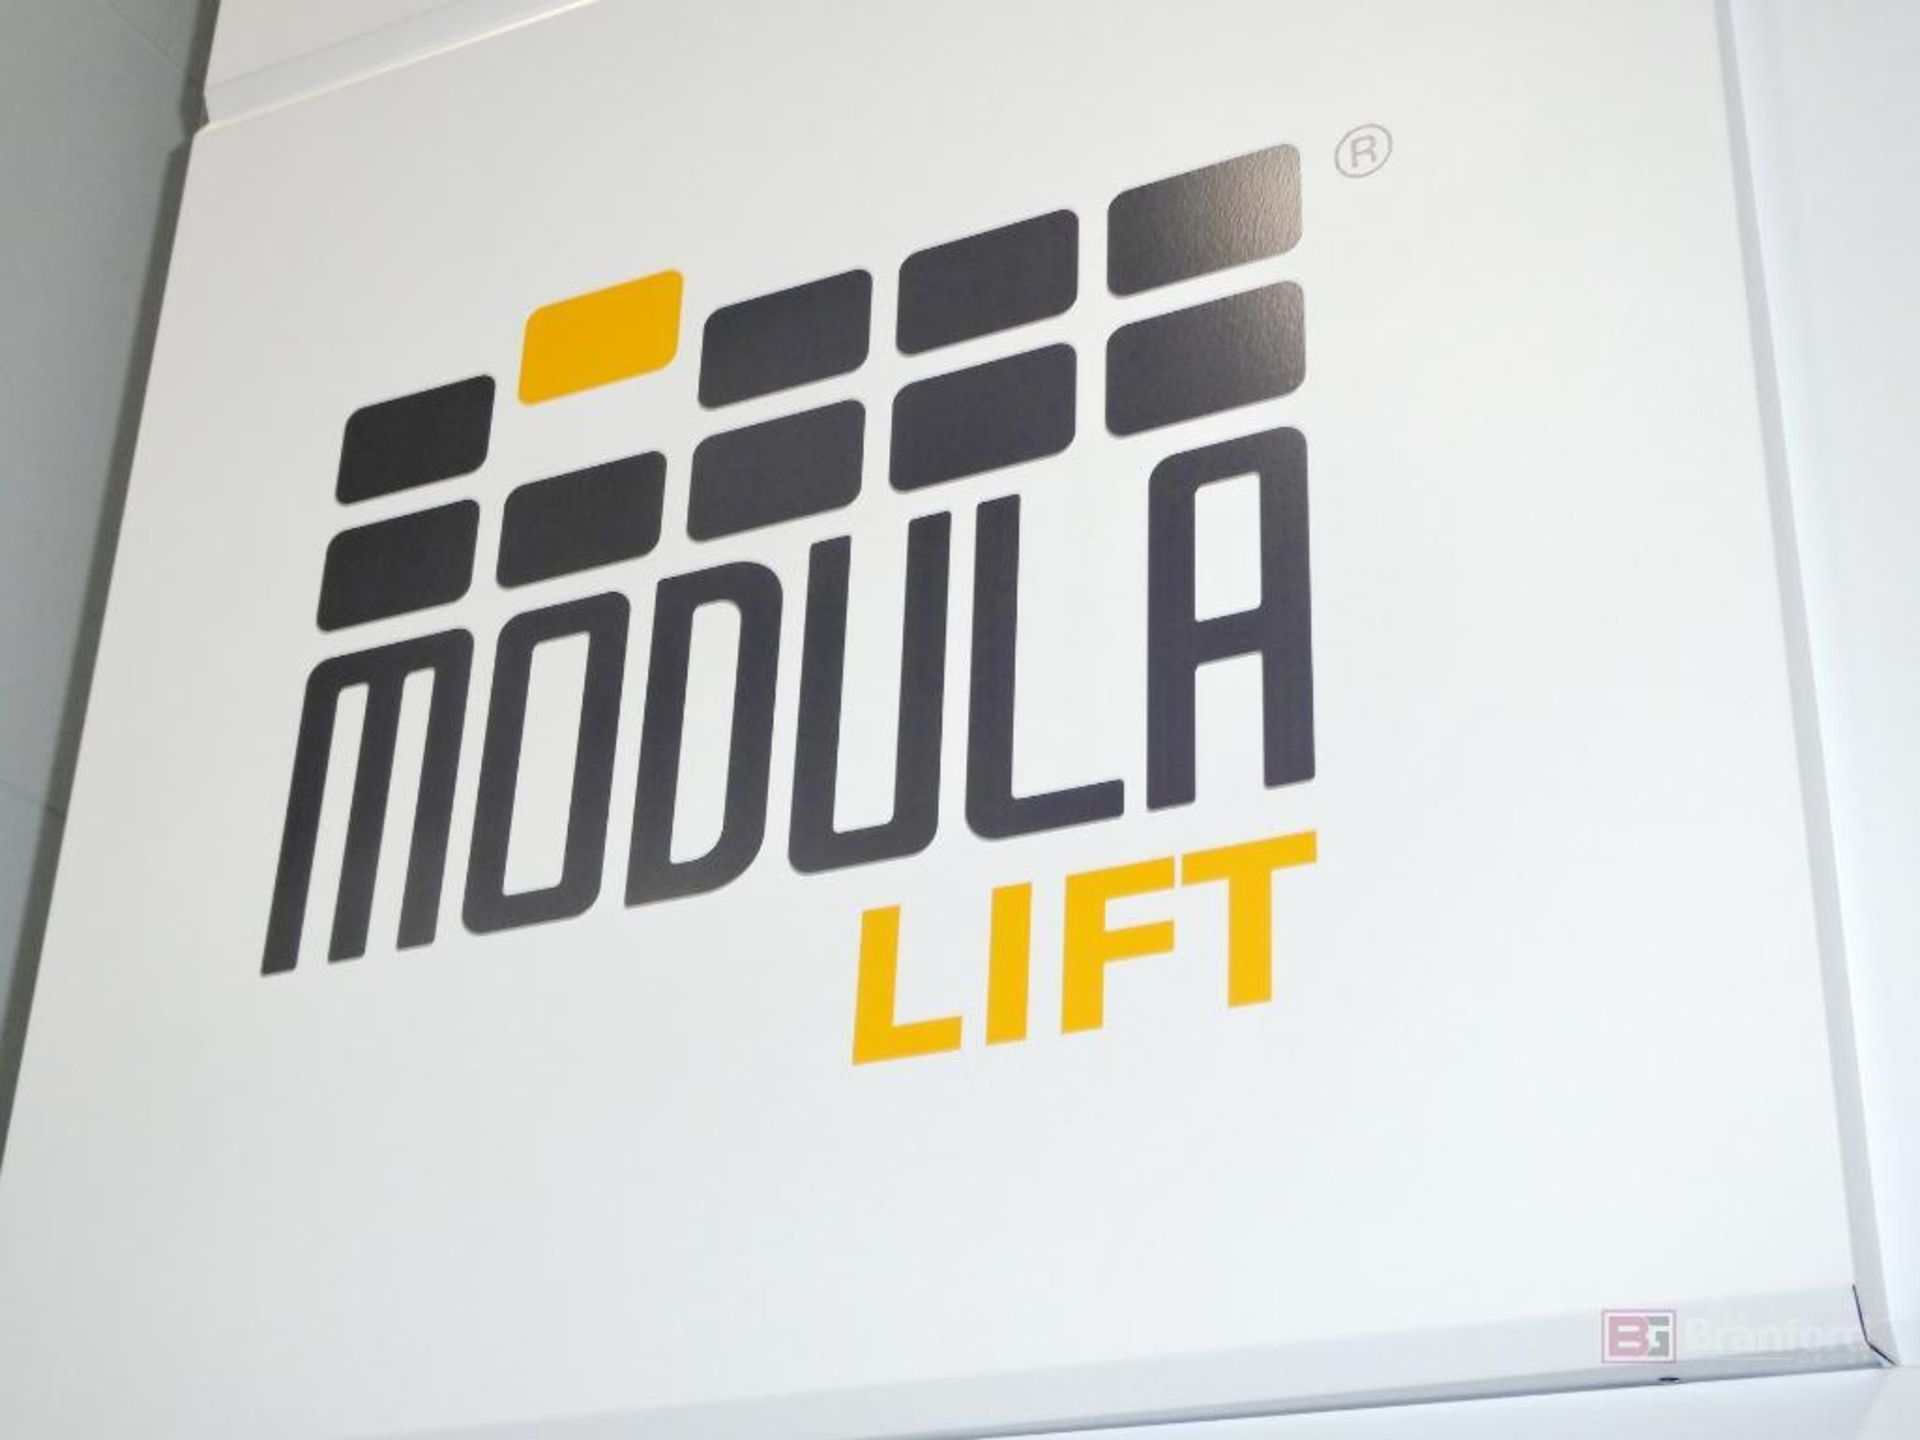 2021 Modula Lift Model ML50D, Automated Vertical Carousel Storage System - Image 9 of 10